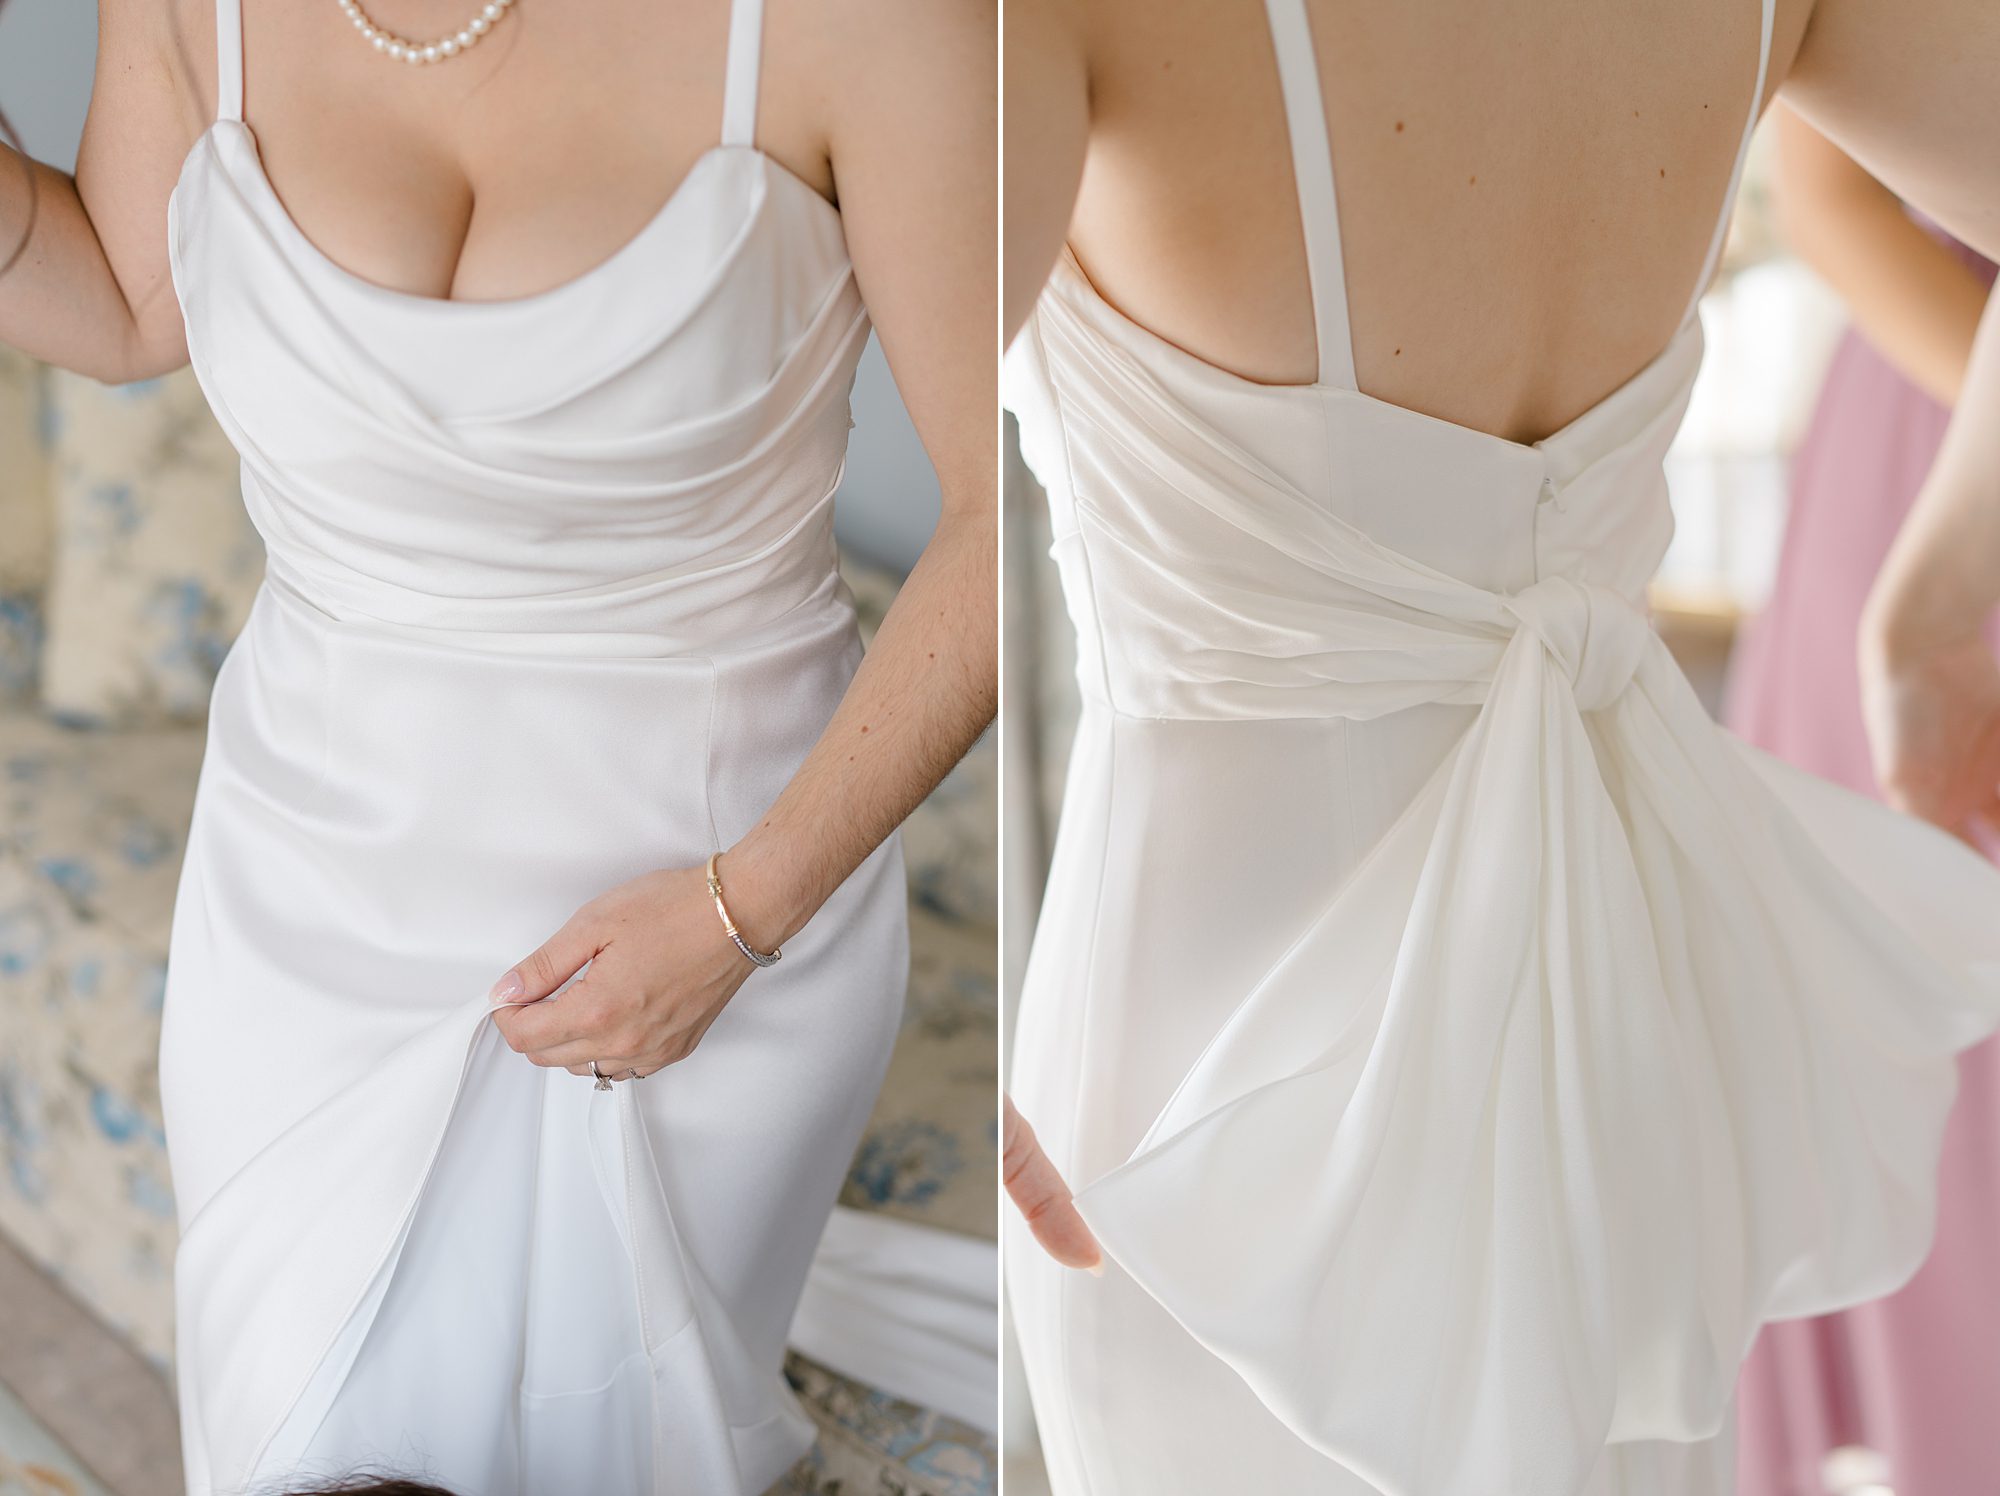 bride's modern satin wedding dress with bow detail in the back